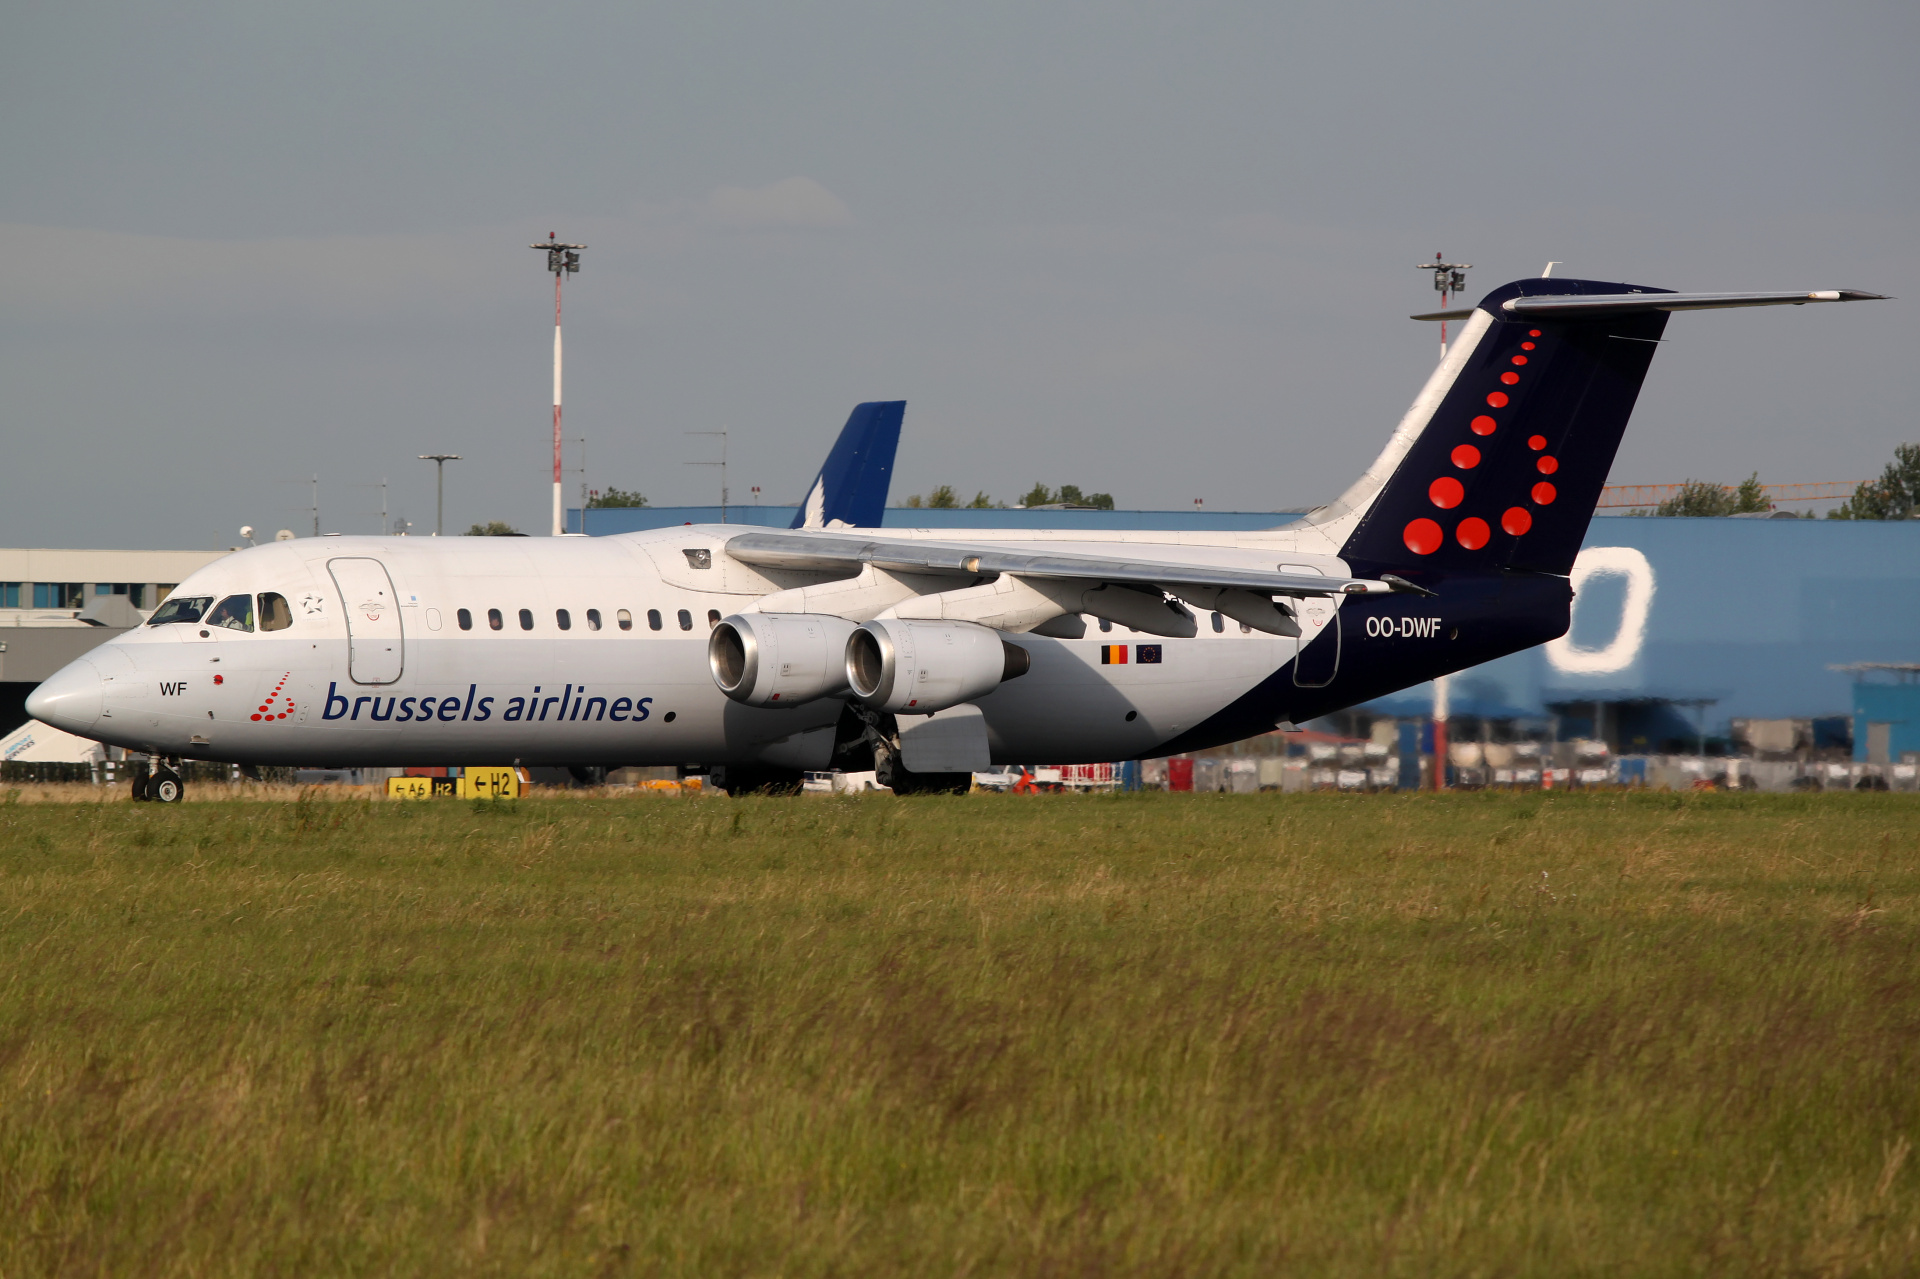 OO-DWF (Aircraft » EPWA Spotting » BAe 146 and revisions » Avro RJ100 » Brussels Airlines)